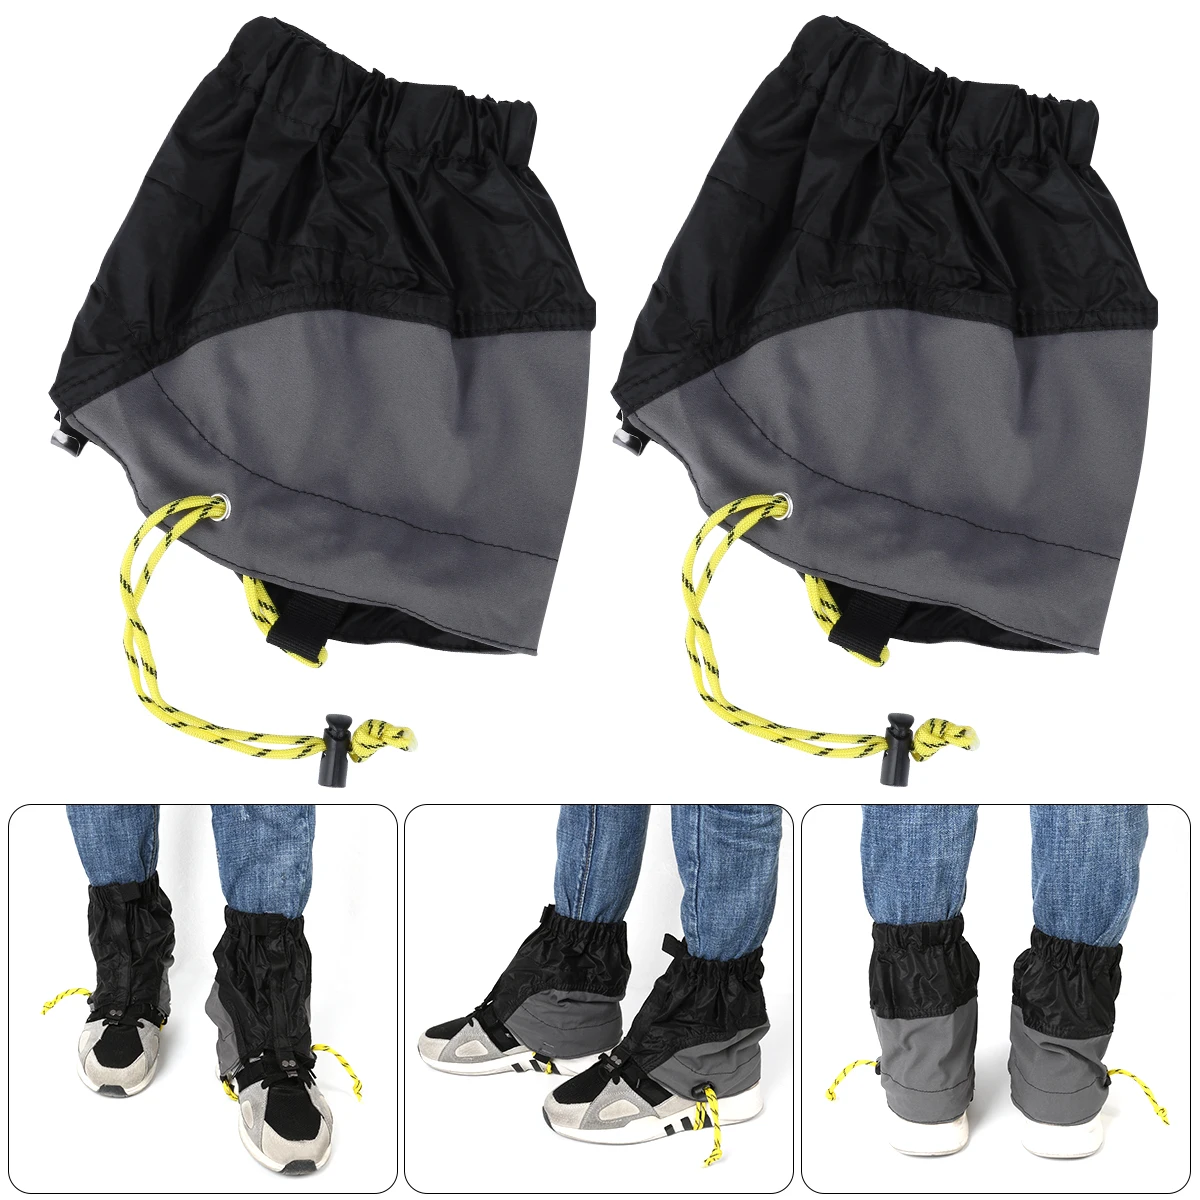 

WINOMO Pair of Ankle Gaiter Gaiters 20D Travel Silicon Coated Cloth Outdoor Waterproof Durable For Walking Camping Hiking